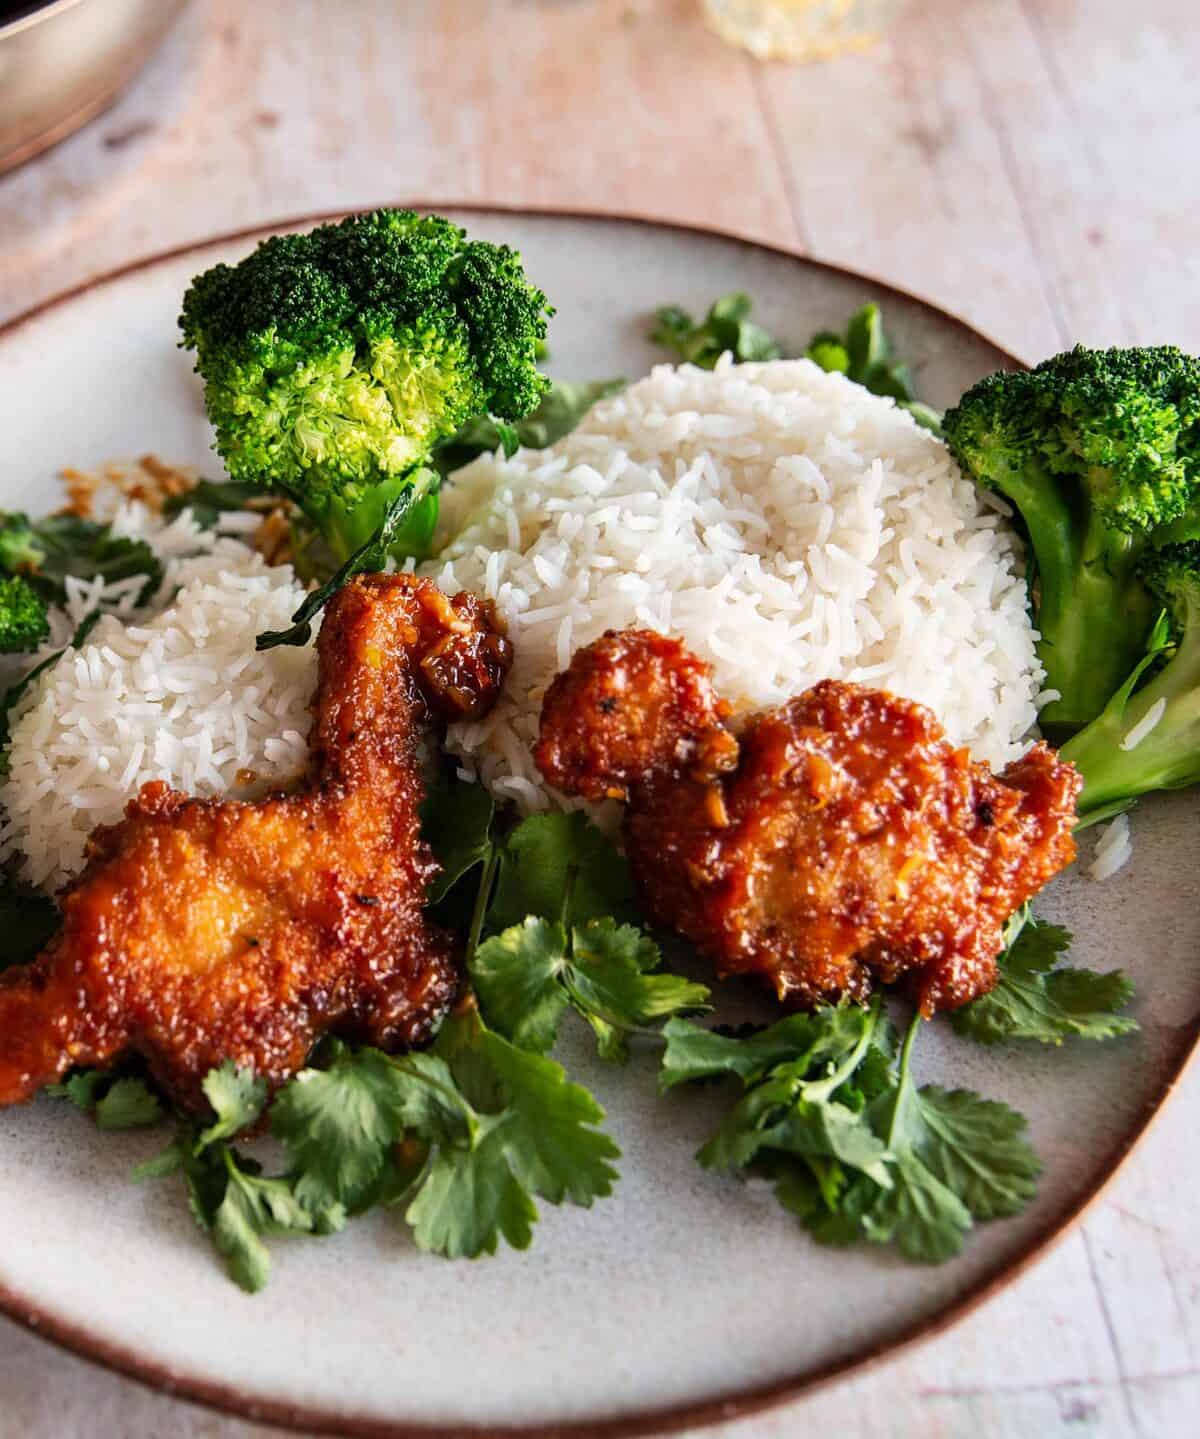  Orange Chicken never looked so fierce and flavorful!